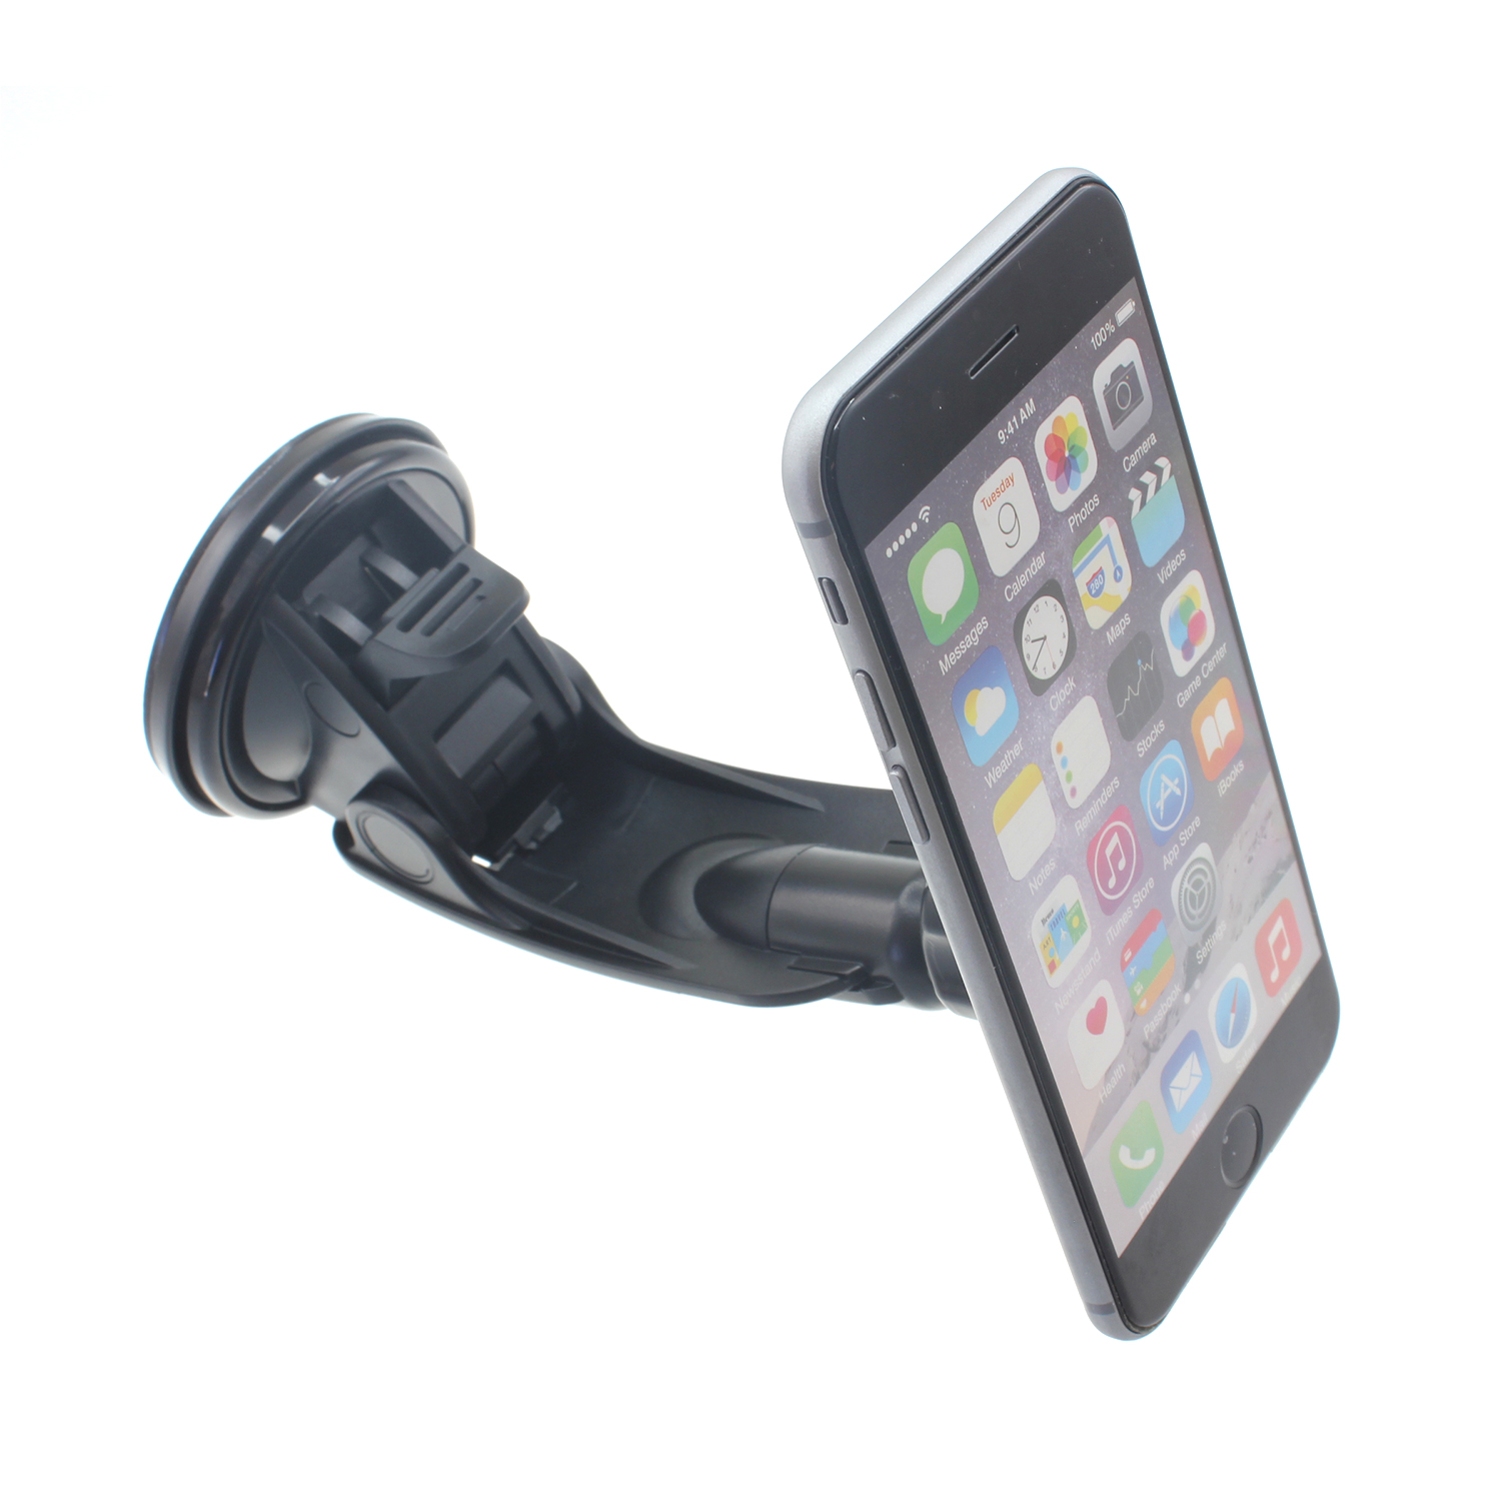 For LG V60 ThinQ Phone - Magnetic Car Mount, Holder Dash Windshield Swivel Strong Grip Strong Magnets for LG V60 ThinQ 5G - image 1 of 11